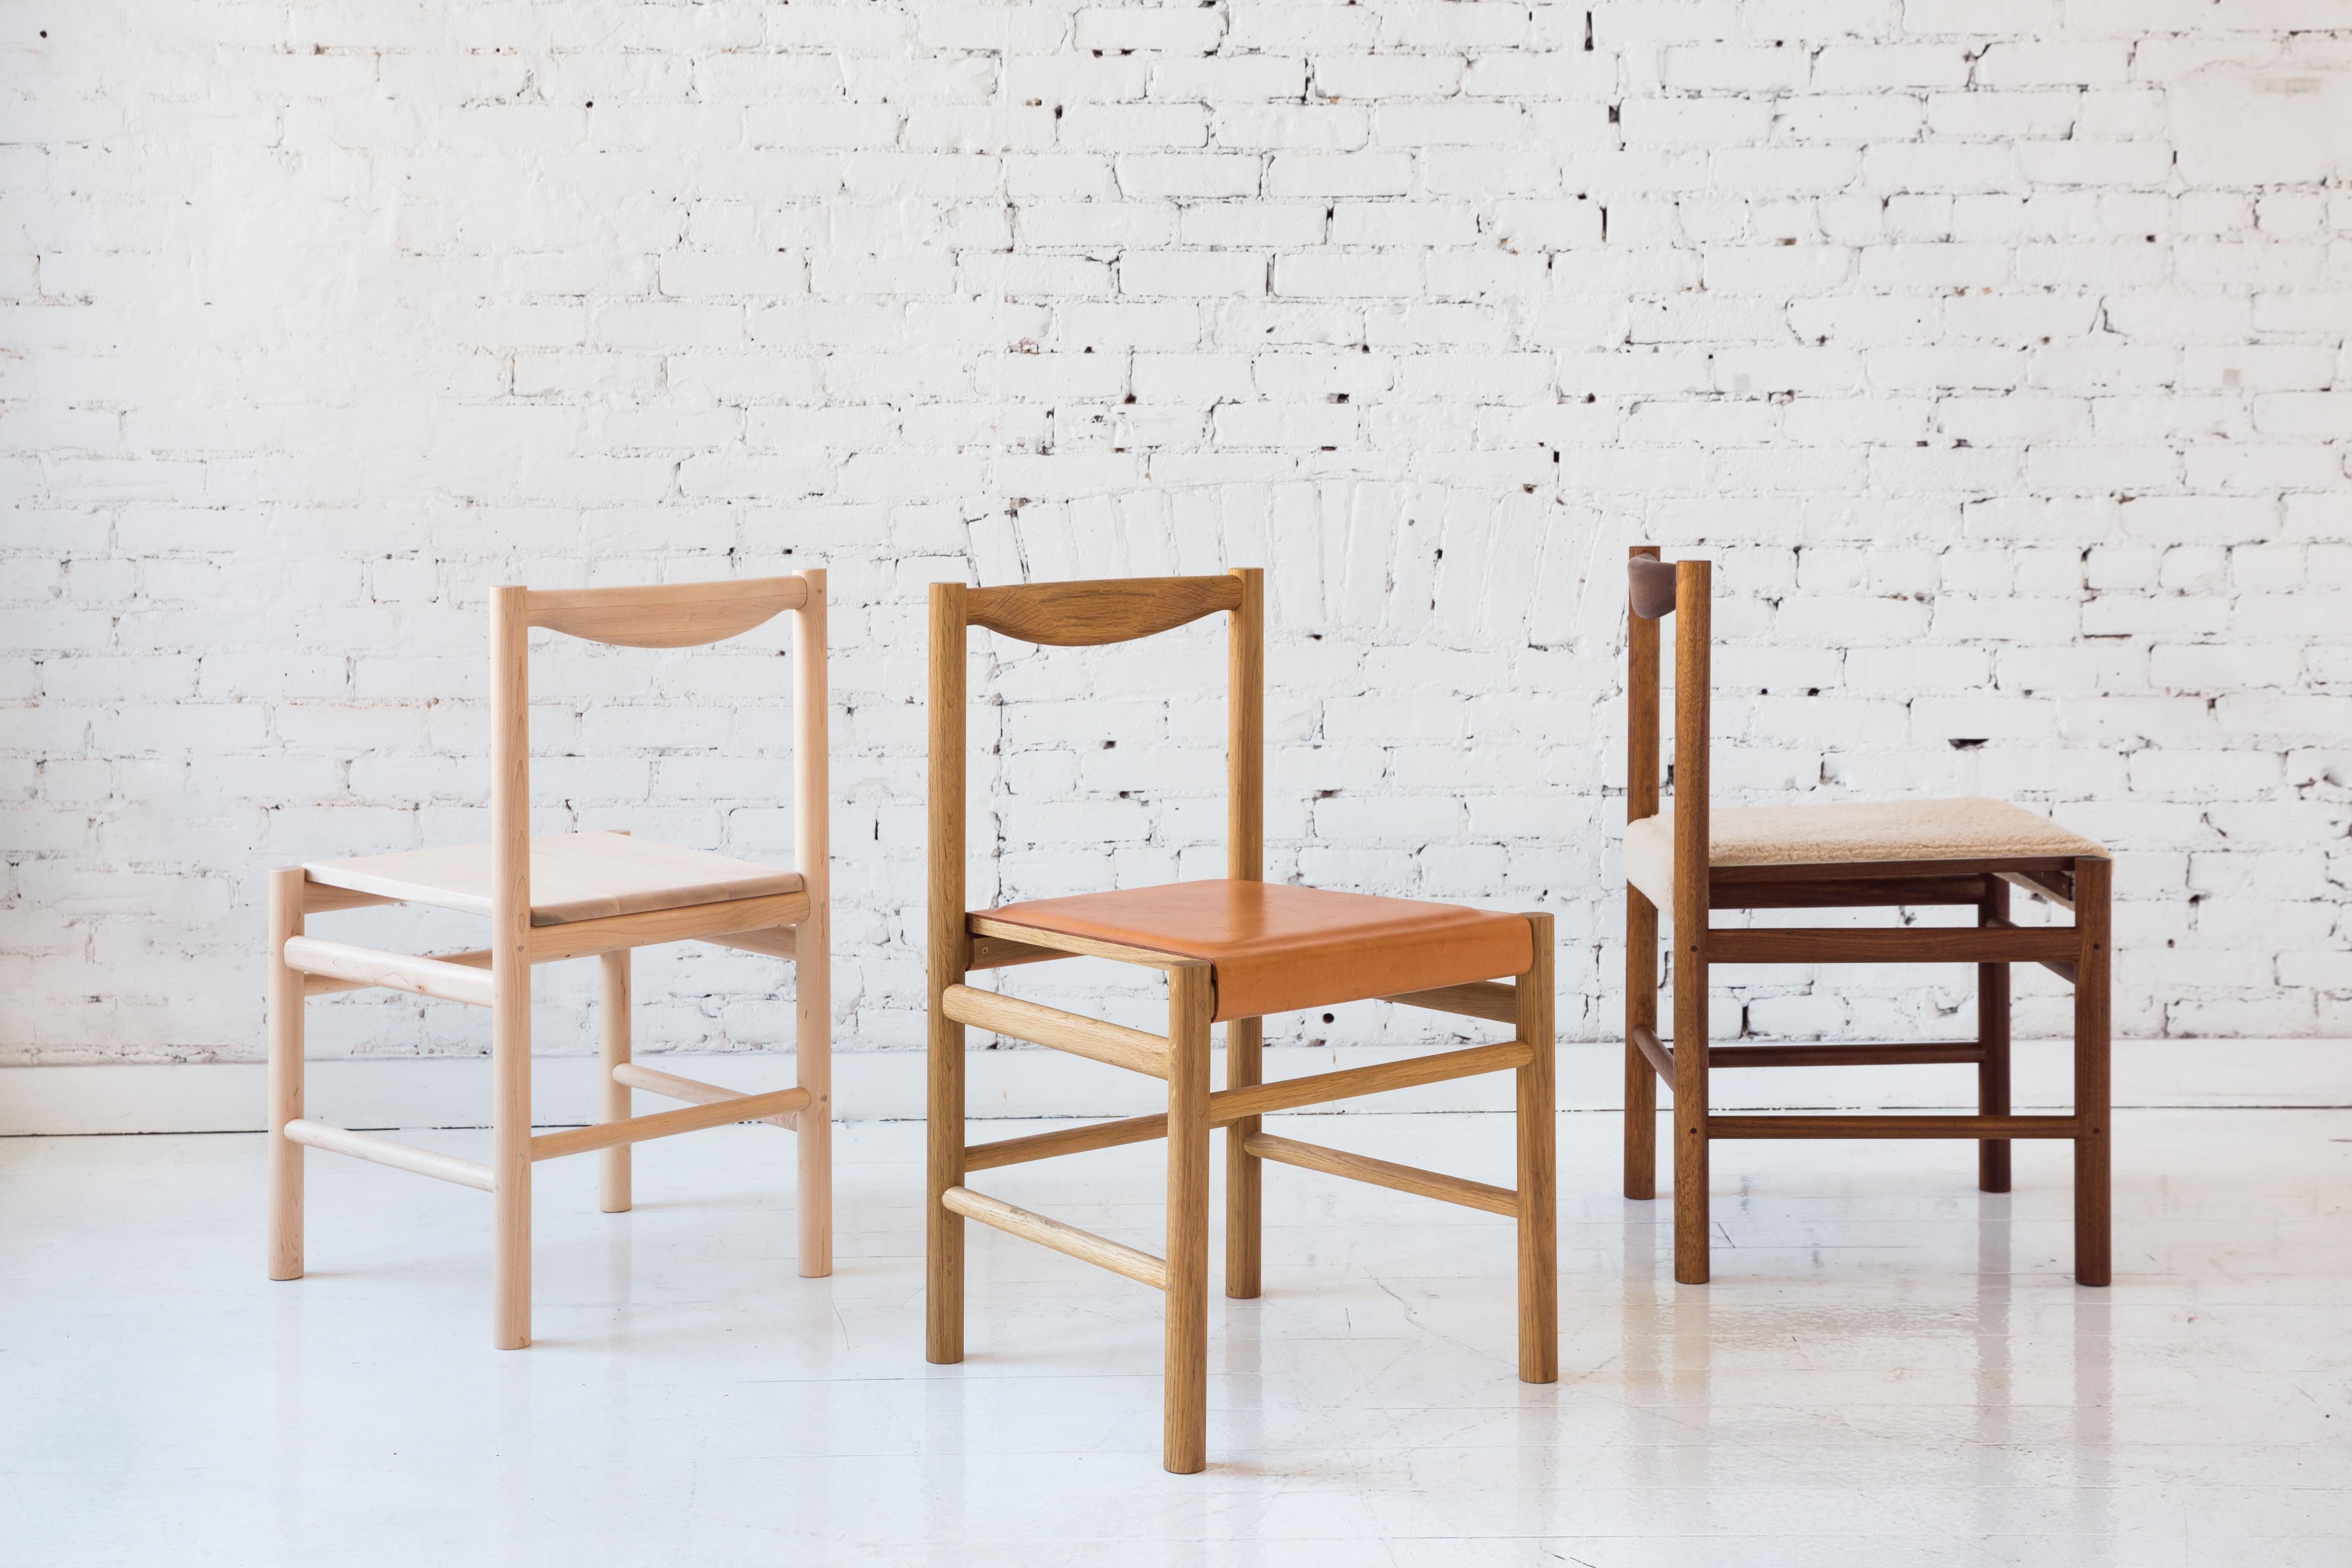 maple wood chairs